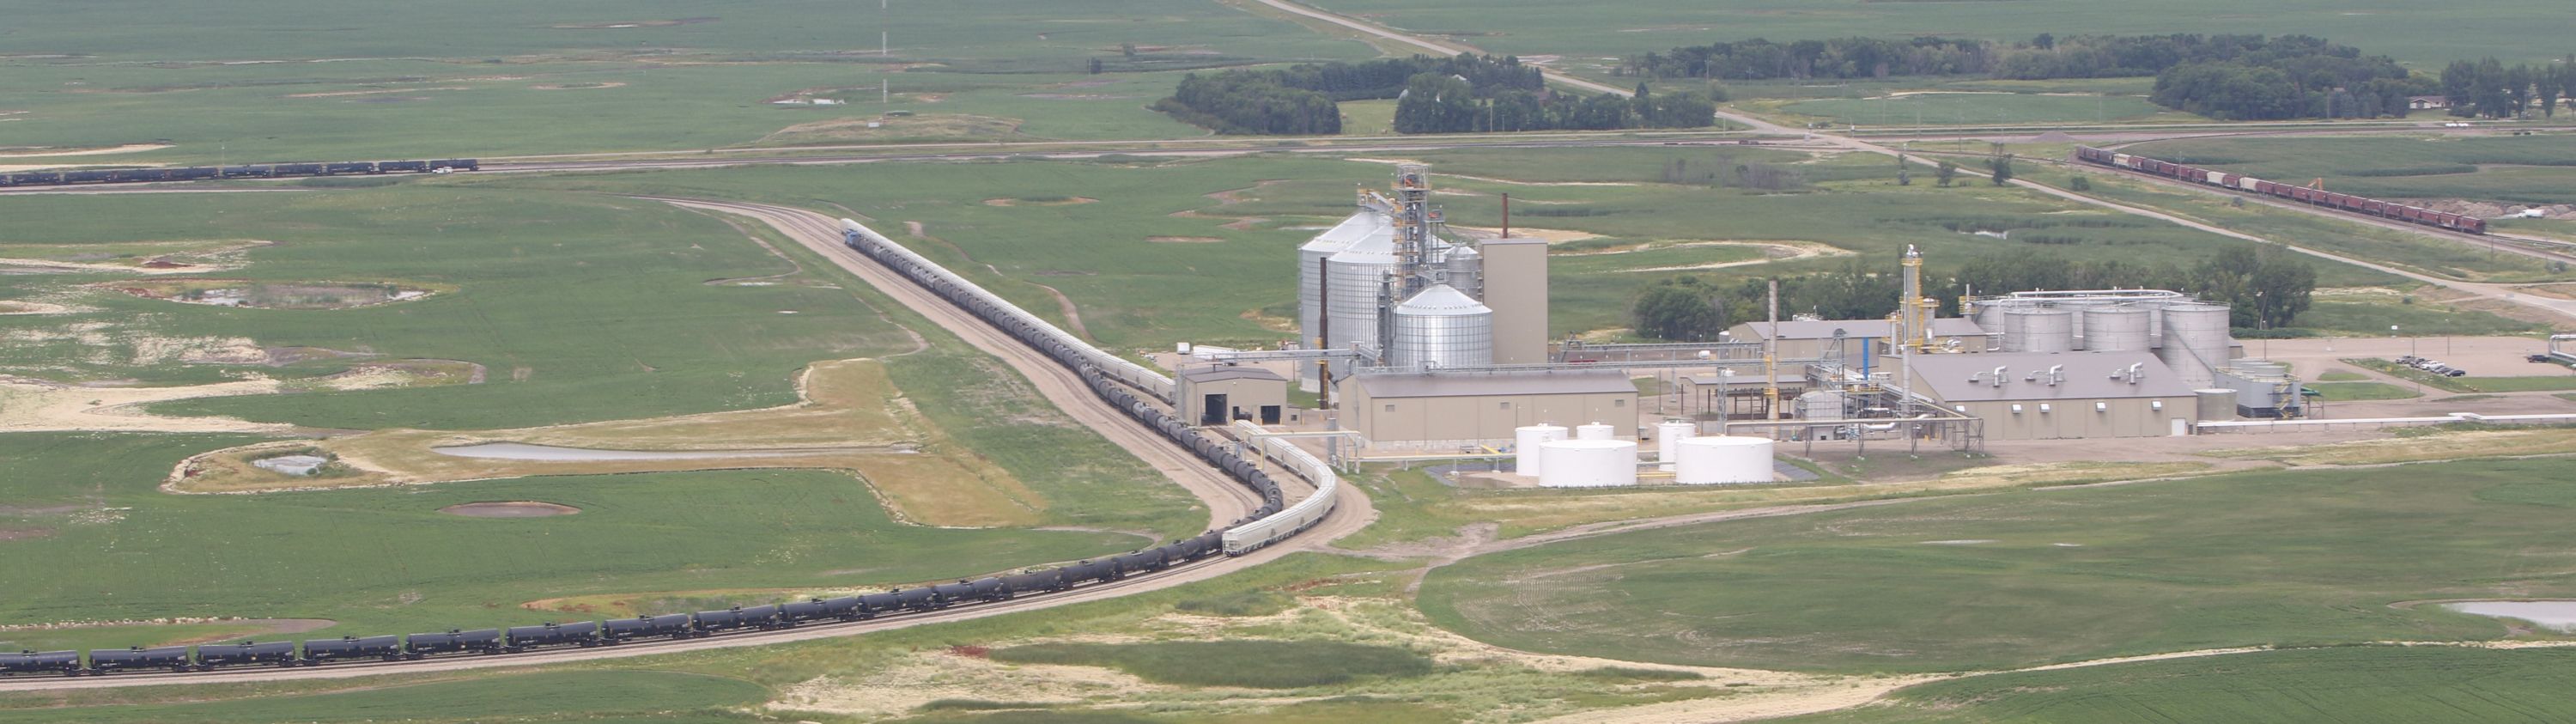 aerial view of grain elevators and trains